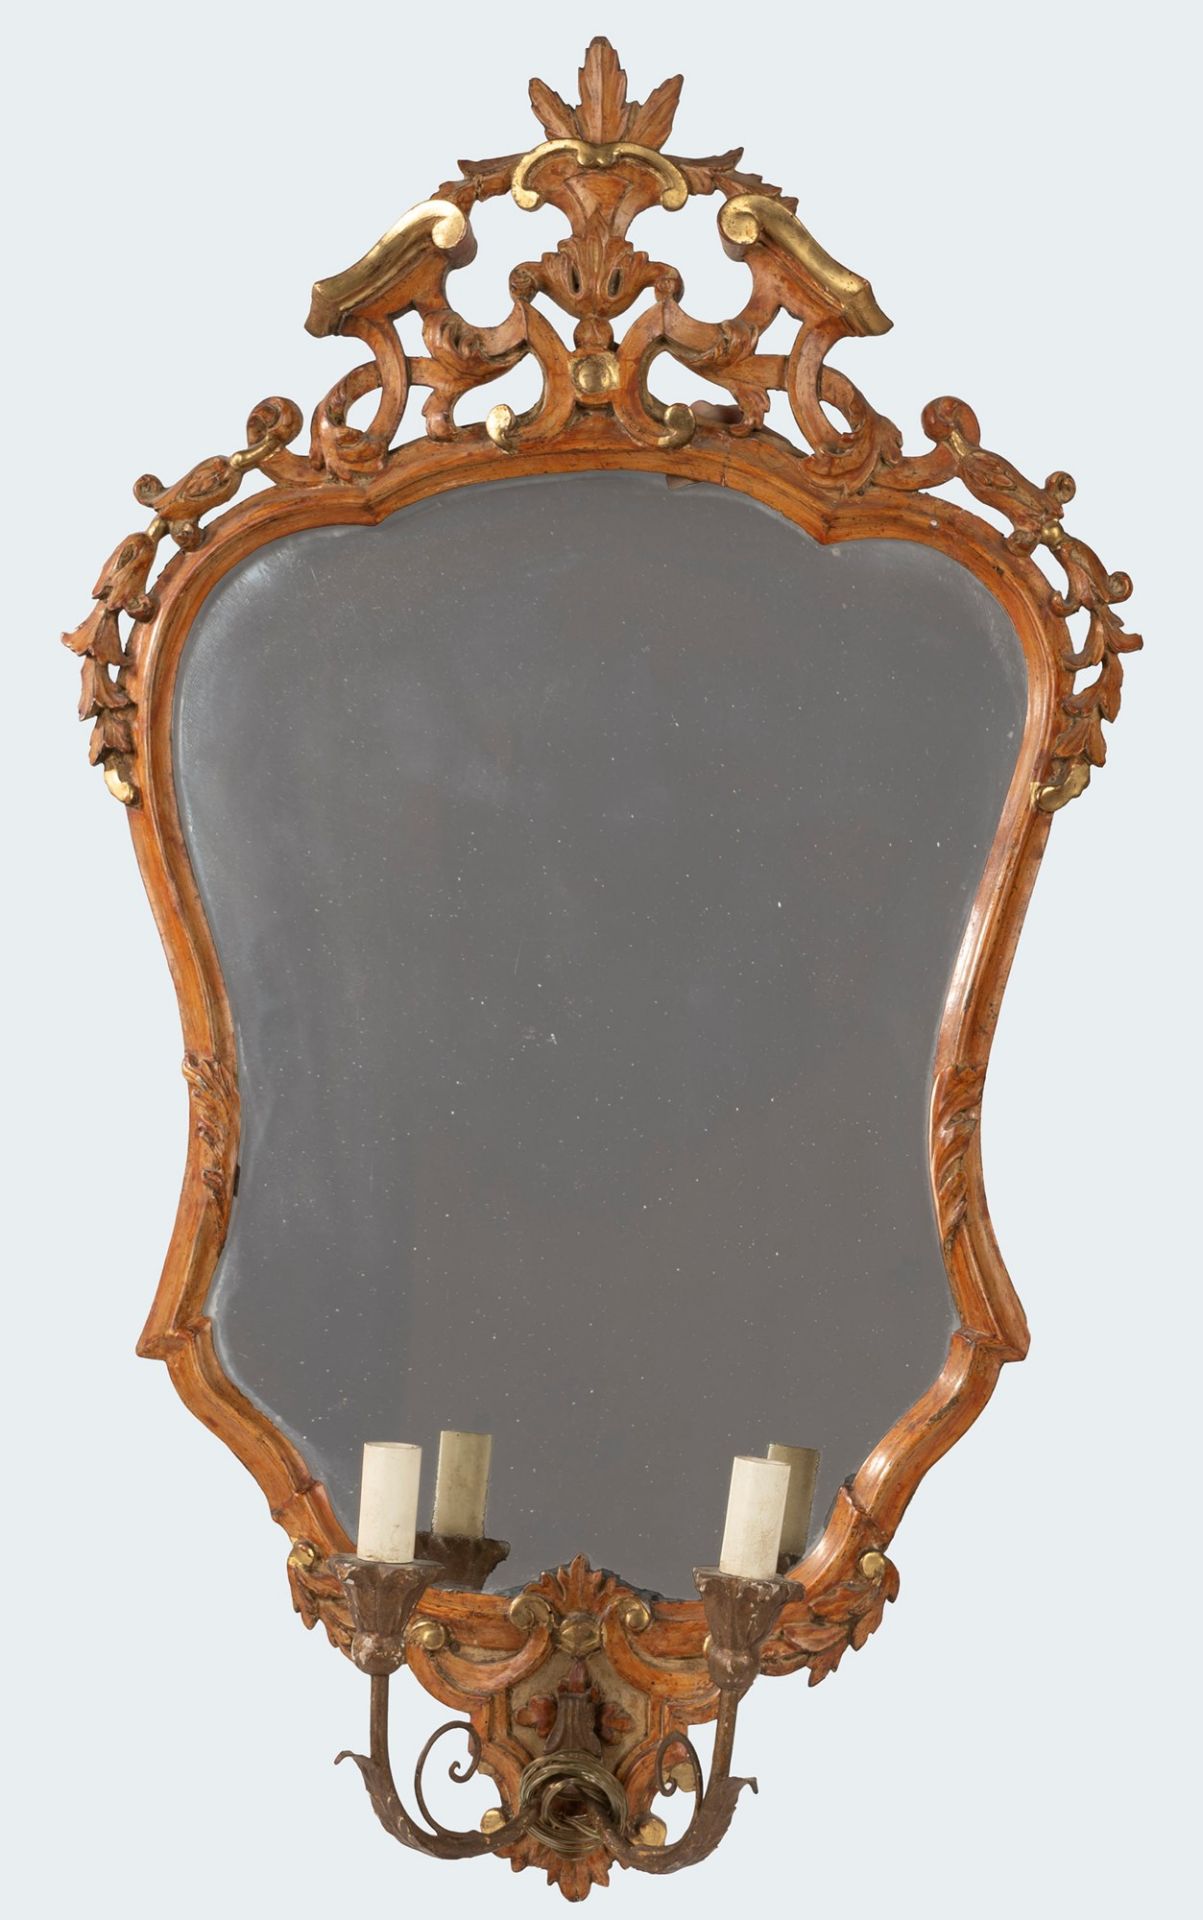 Pair of mirrors with candle holders in carved, gilded and lacquered wood, 18th century - Image 2 of 5